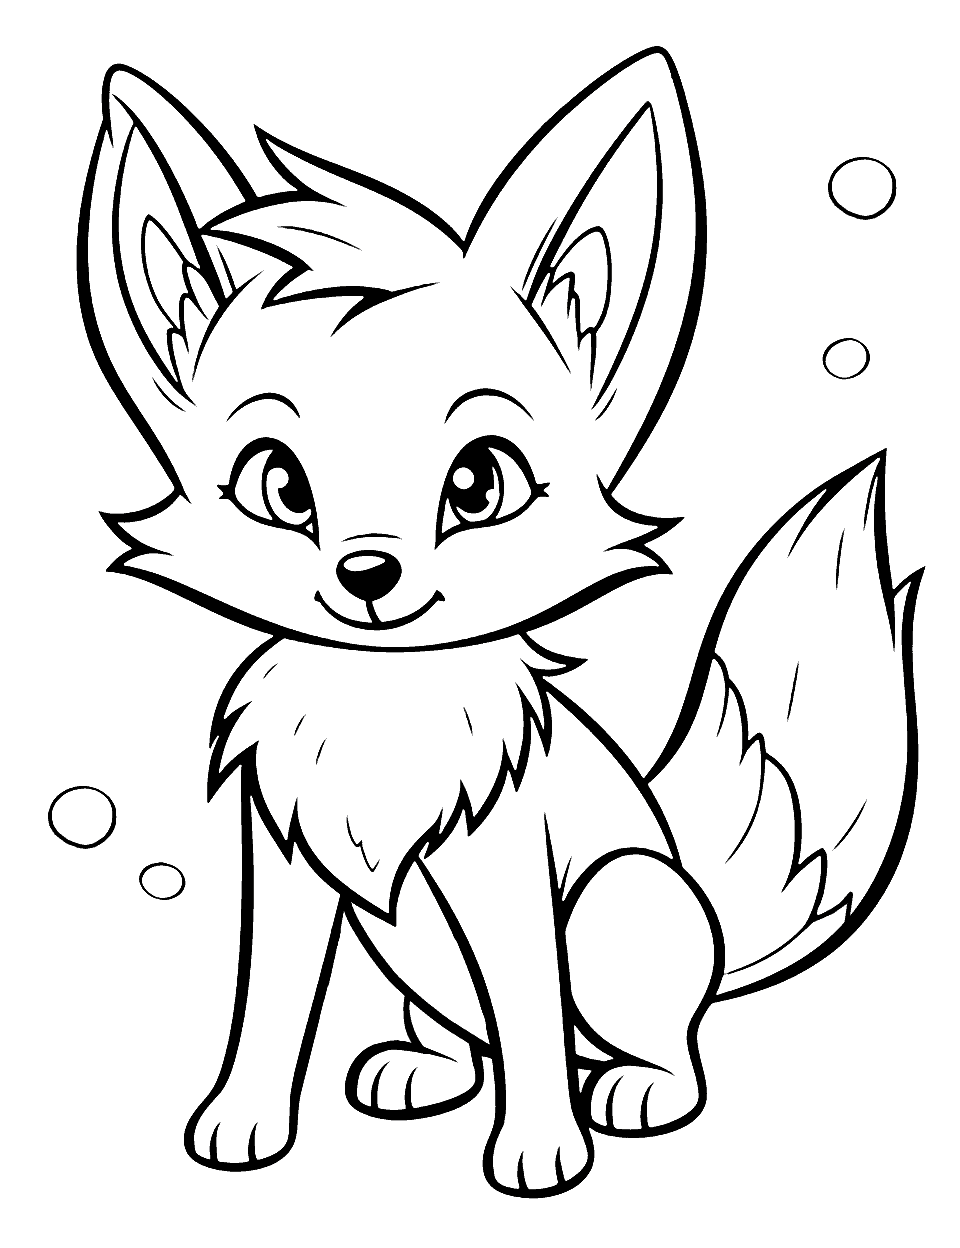 Anime Fox Hero Coloring Page - An anime-inspired fox with sharp eyes and a confident stance, ready to embark on a new adventure.